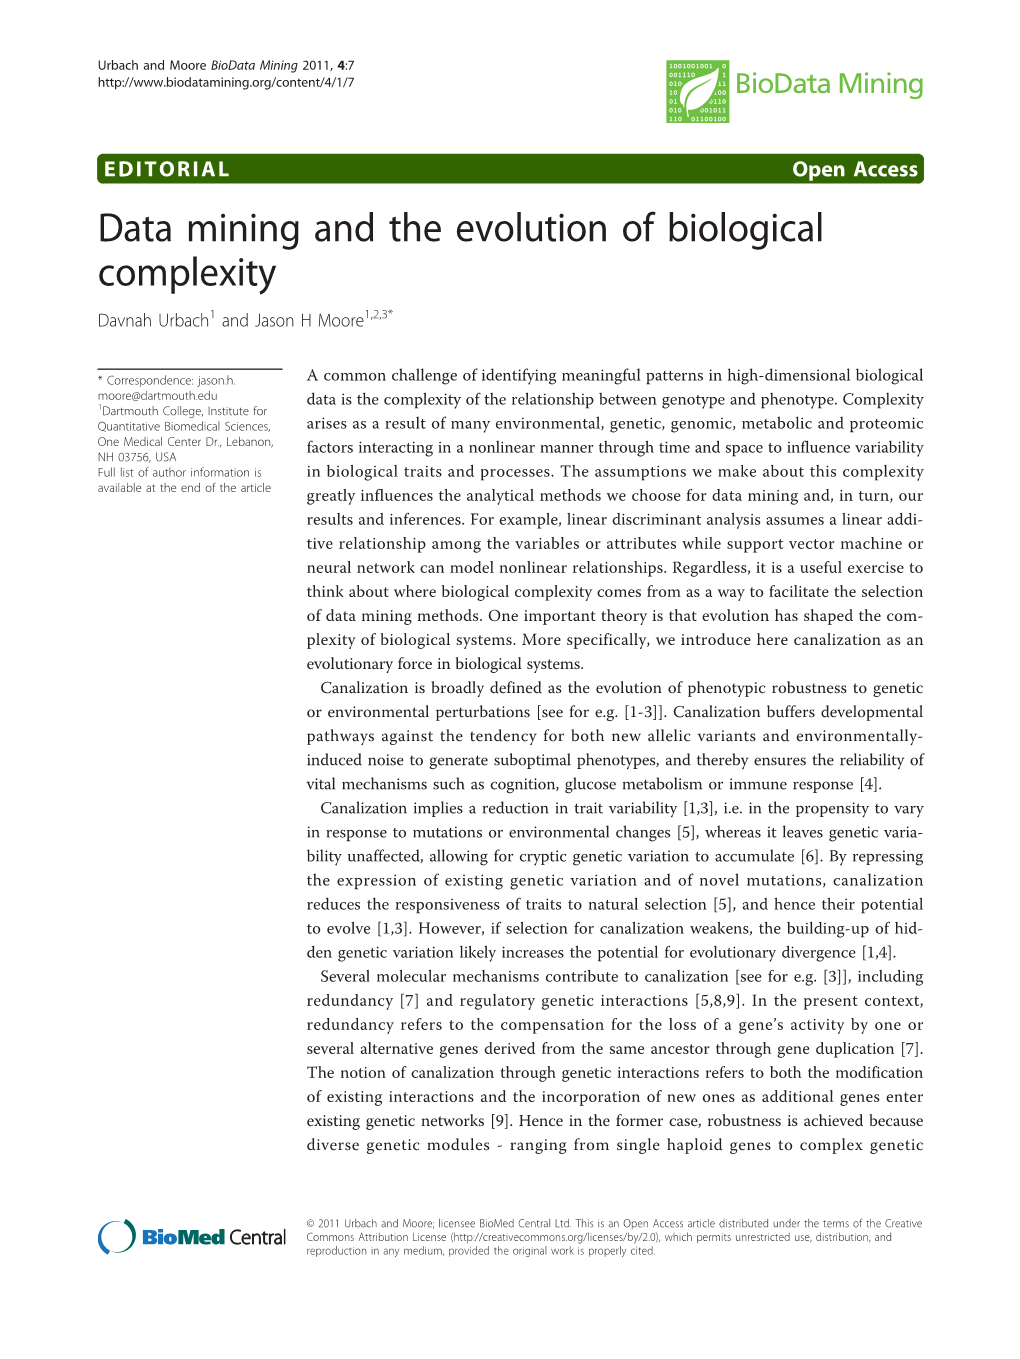 Data Mining and the Evolution of Biological Complexity Davnah Urbach1 and Jason H Moore1,2,3*